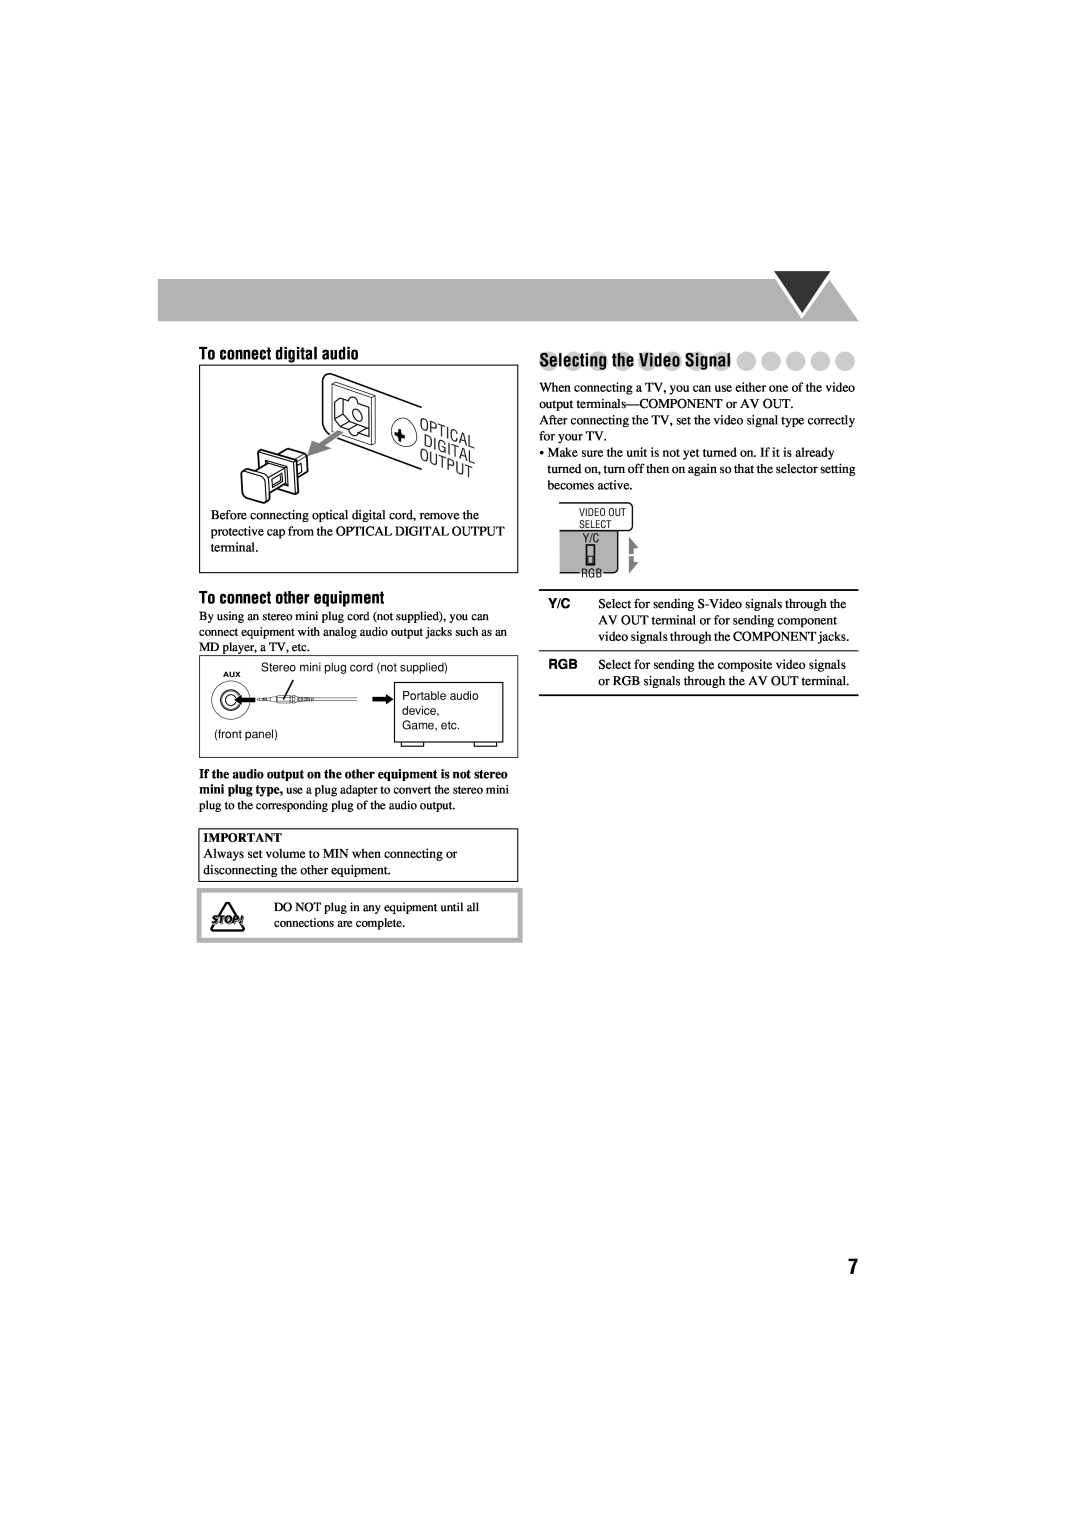 JVC GVT0125-003A Selecting the Video Signal, To connect digital audio, To connect other equipment, Optical Digital Output 